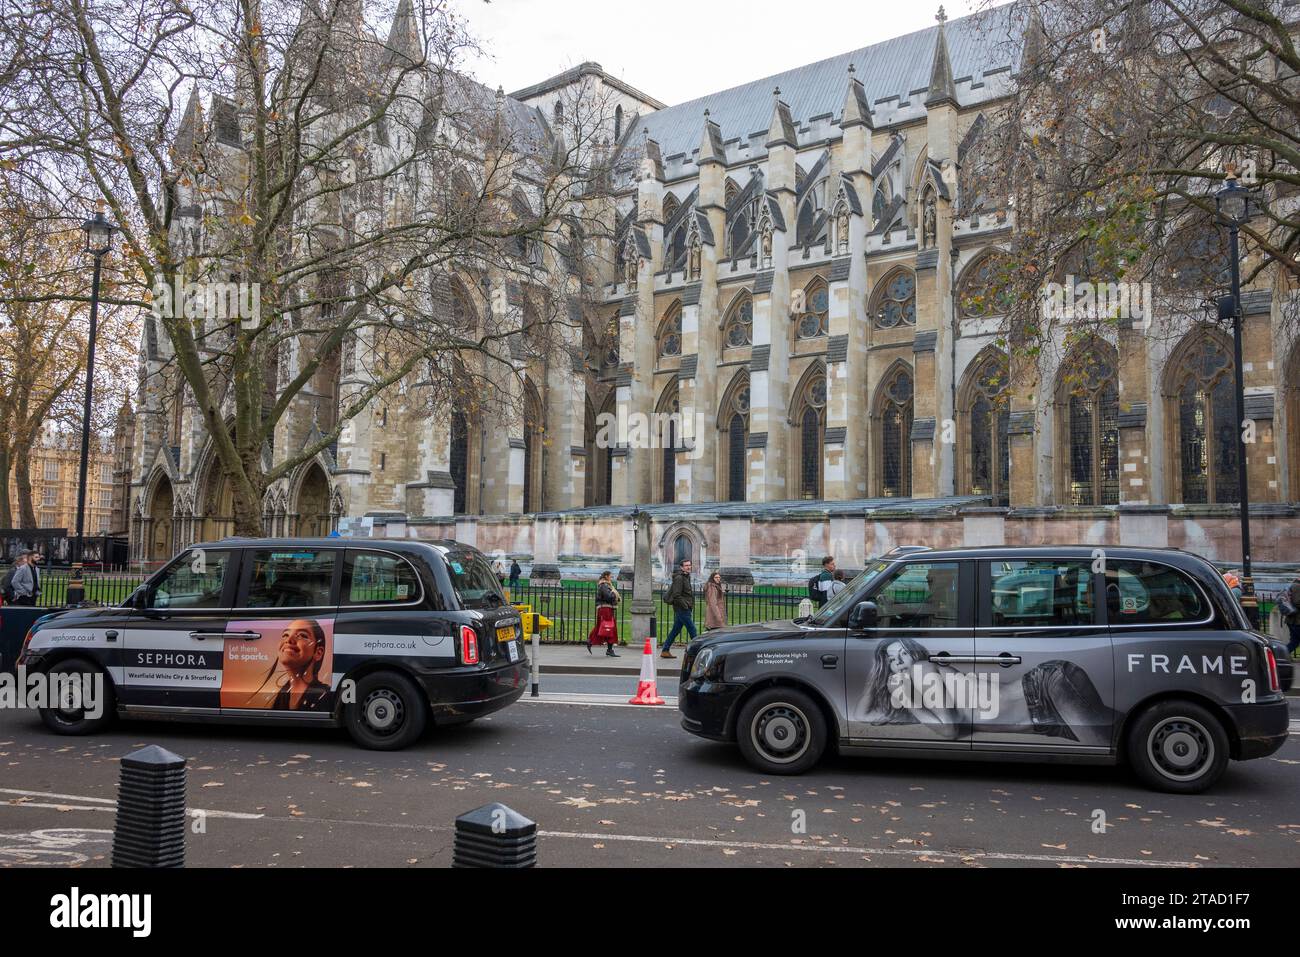 Schwarze Taxis, Taxis, vorbei an Westminster Abbey, London Stockfoto